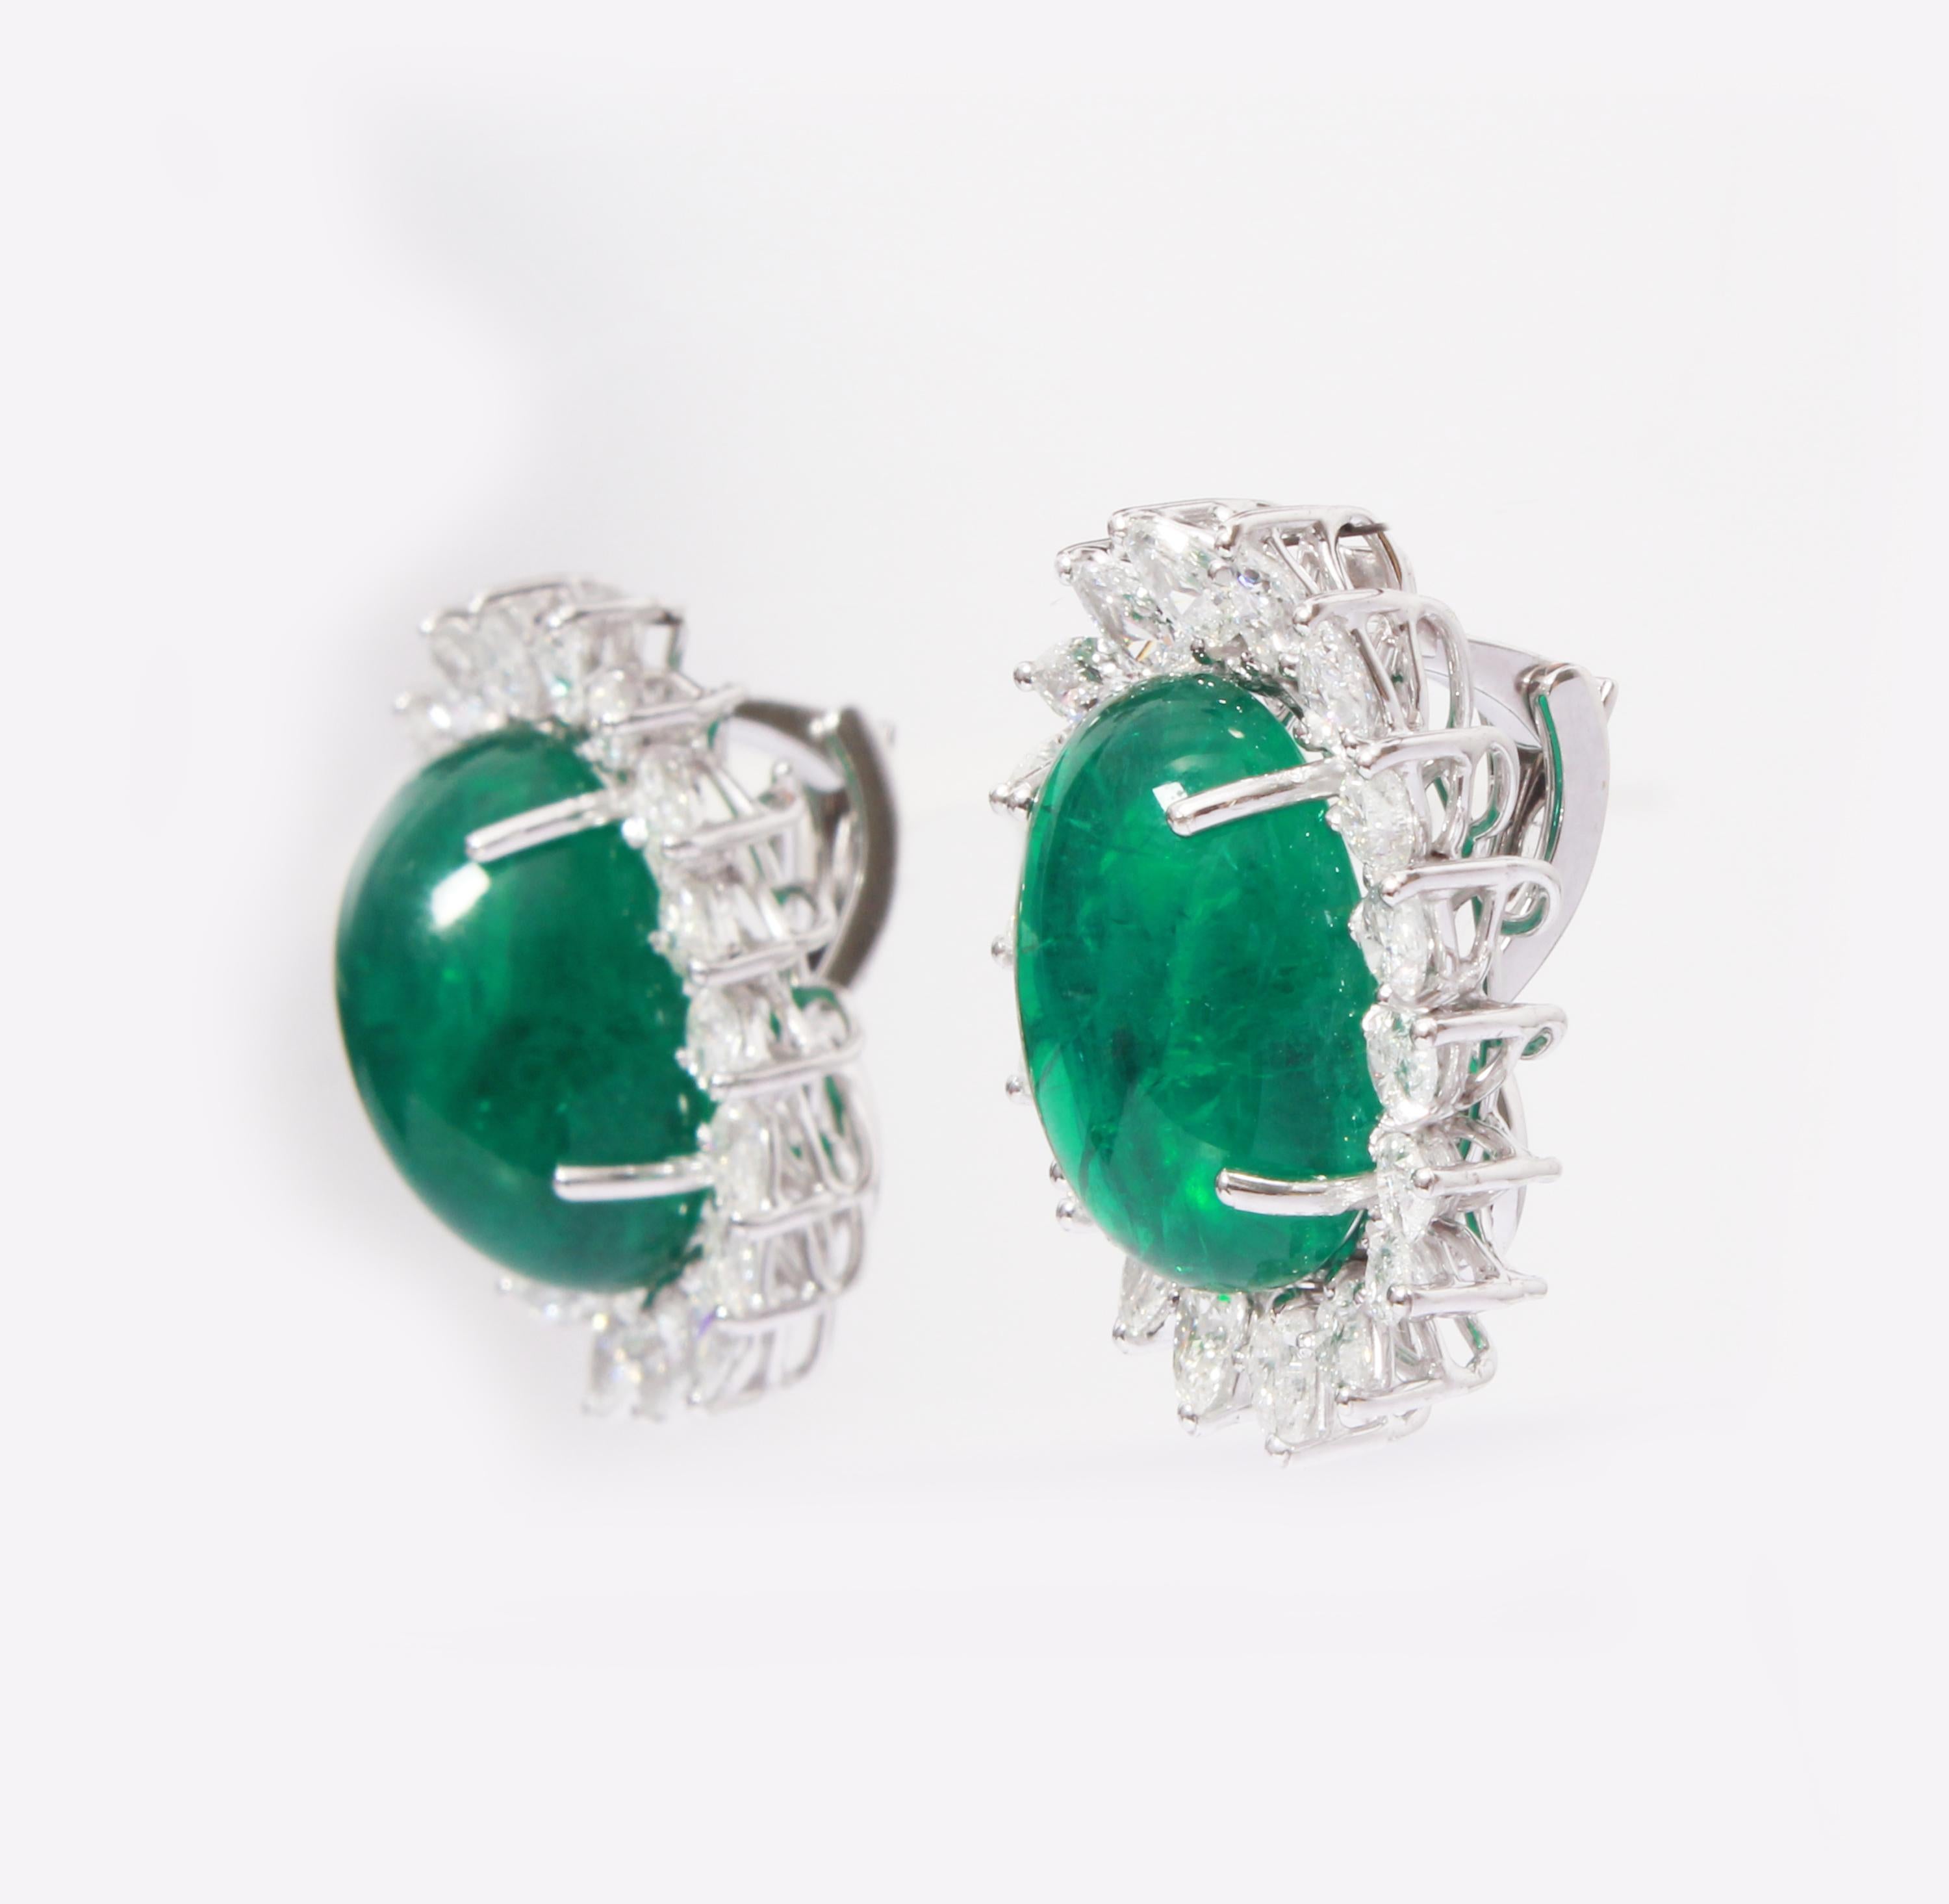 These Earrings have a pair of Zambian cabochon emeralds which weigh 25.02 carats, which are surrounded by 36 Pear Cut White Diamonds that weigh 4.92 carats. The Earrings are made with 18K White gold and weighs approximately 12.270 grams.